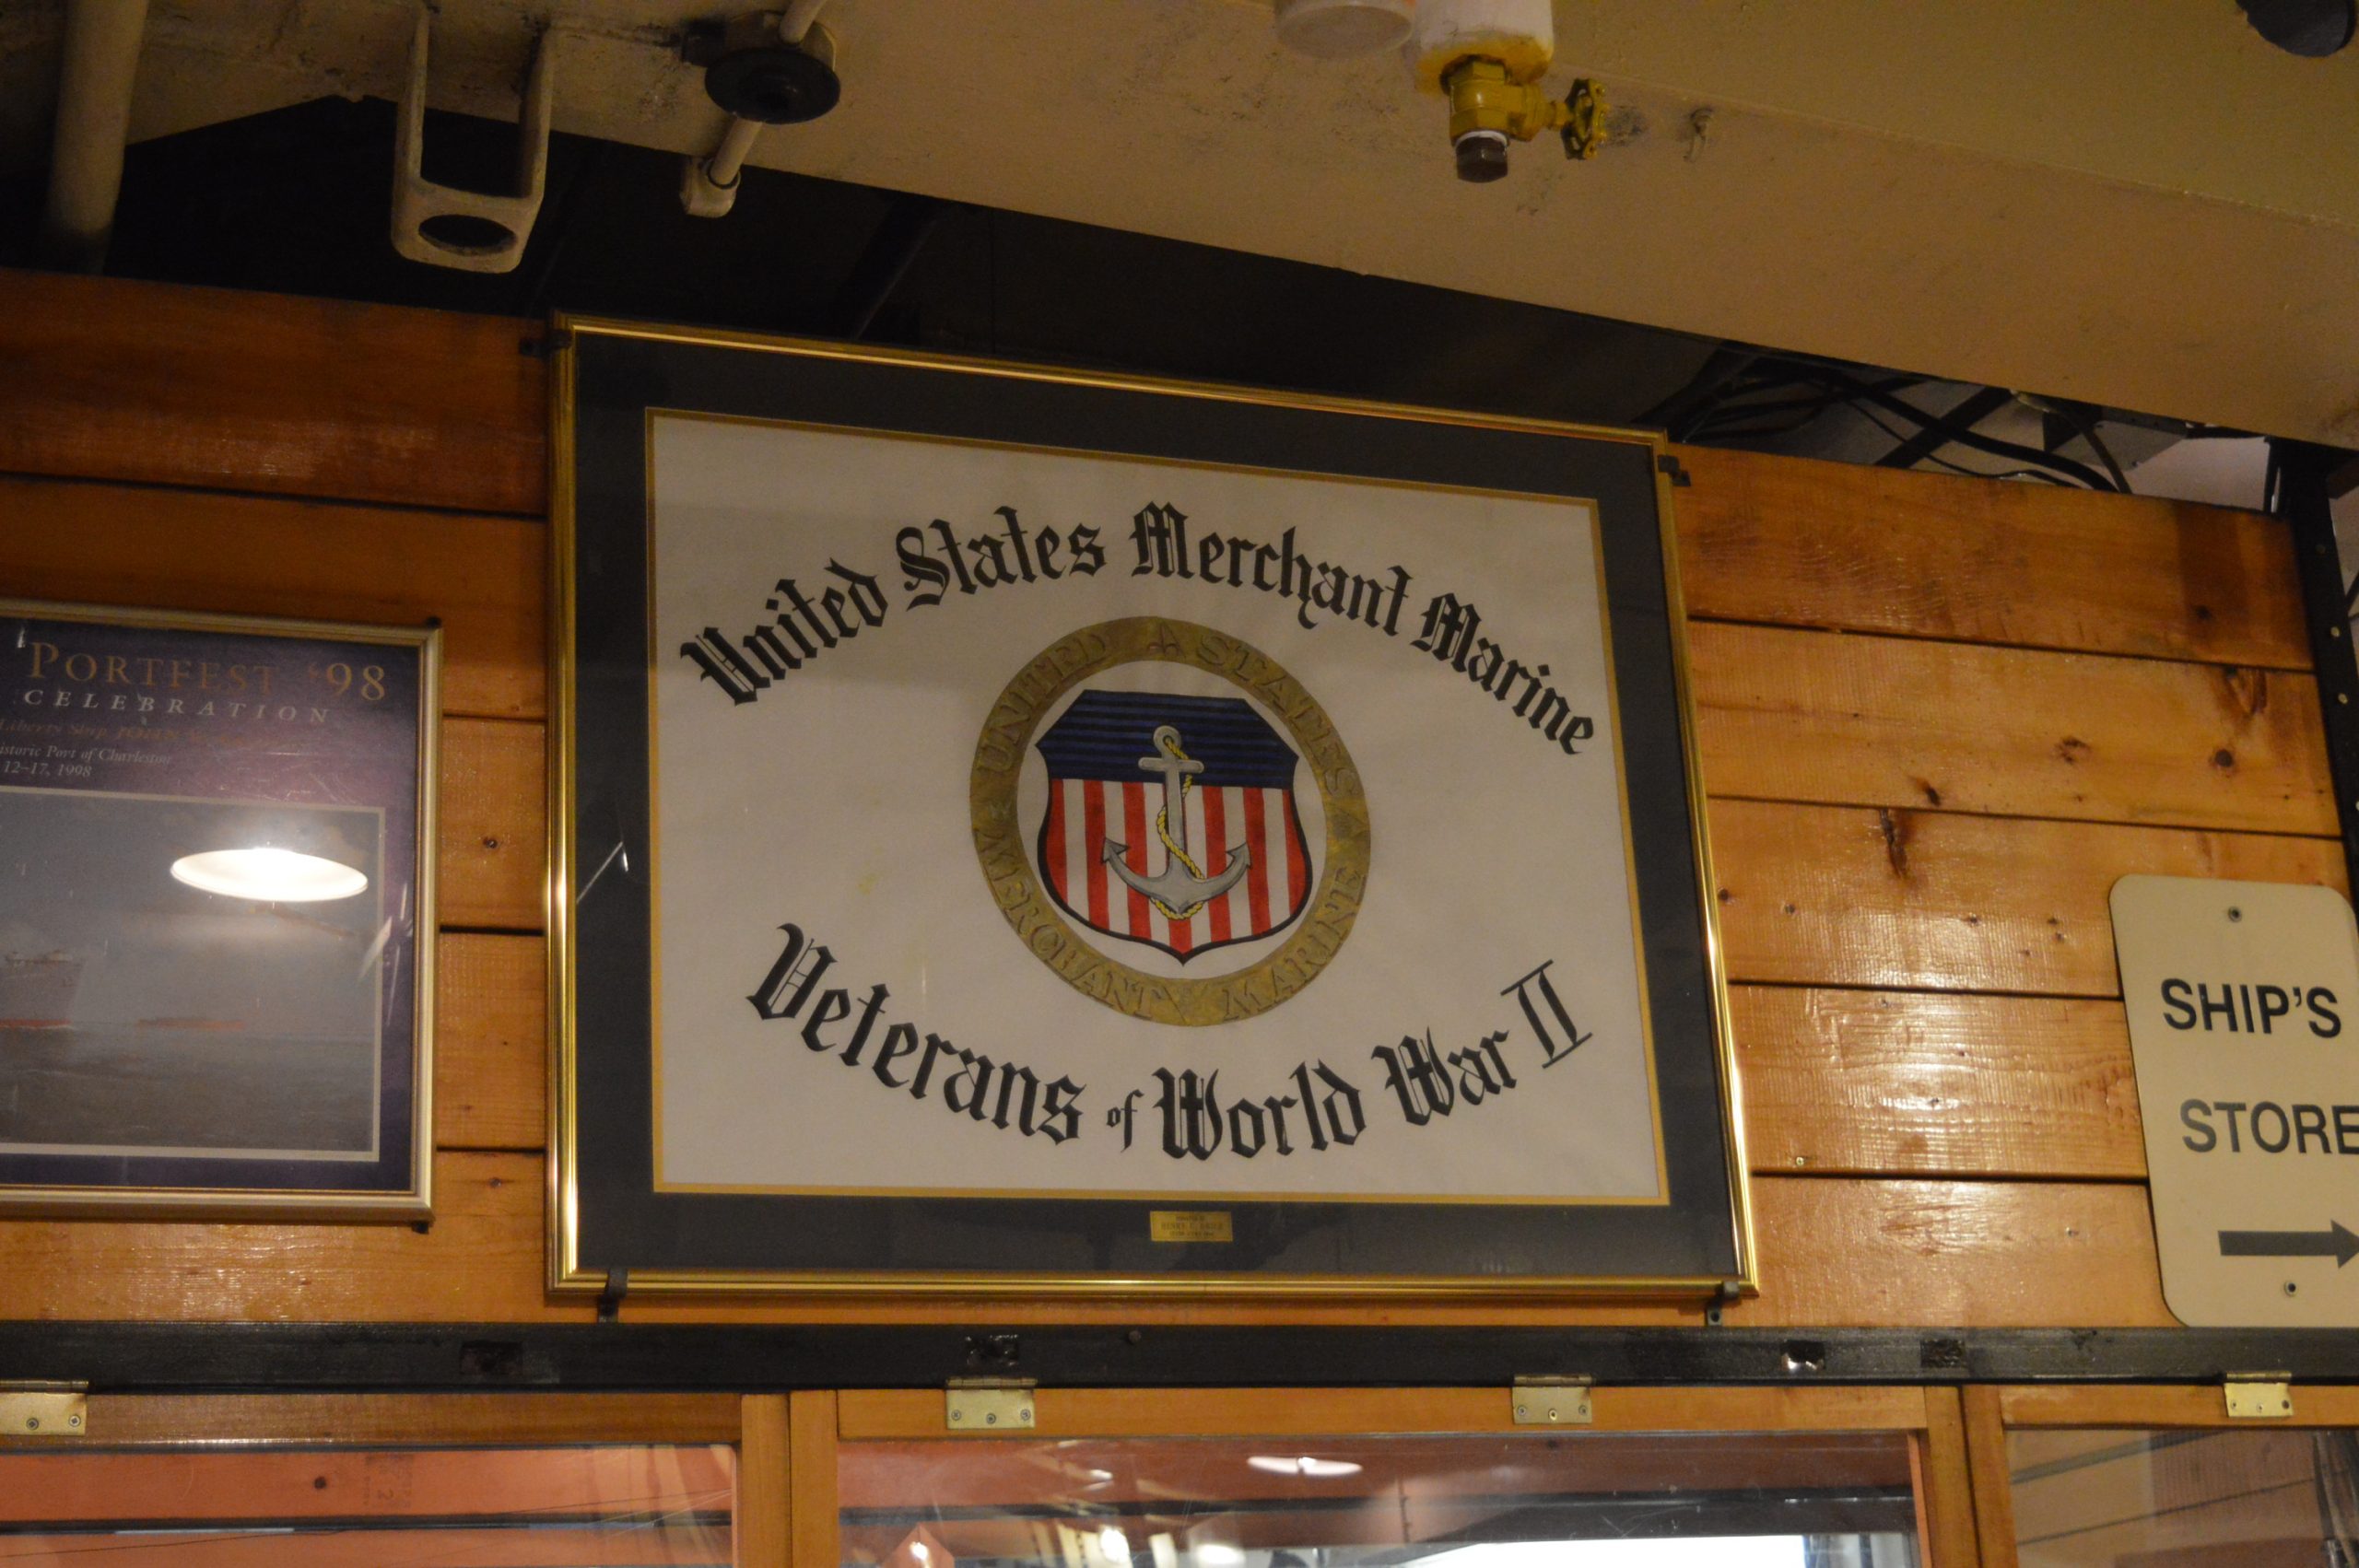 A plaque below deck of the Liberty Ship John W. Brown honors the United States Merchant Marine Veterans of World War II. (credit Anthony C. Hayes)